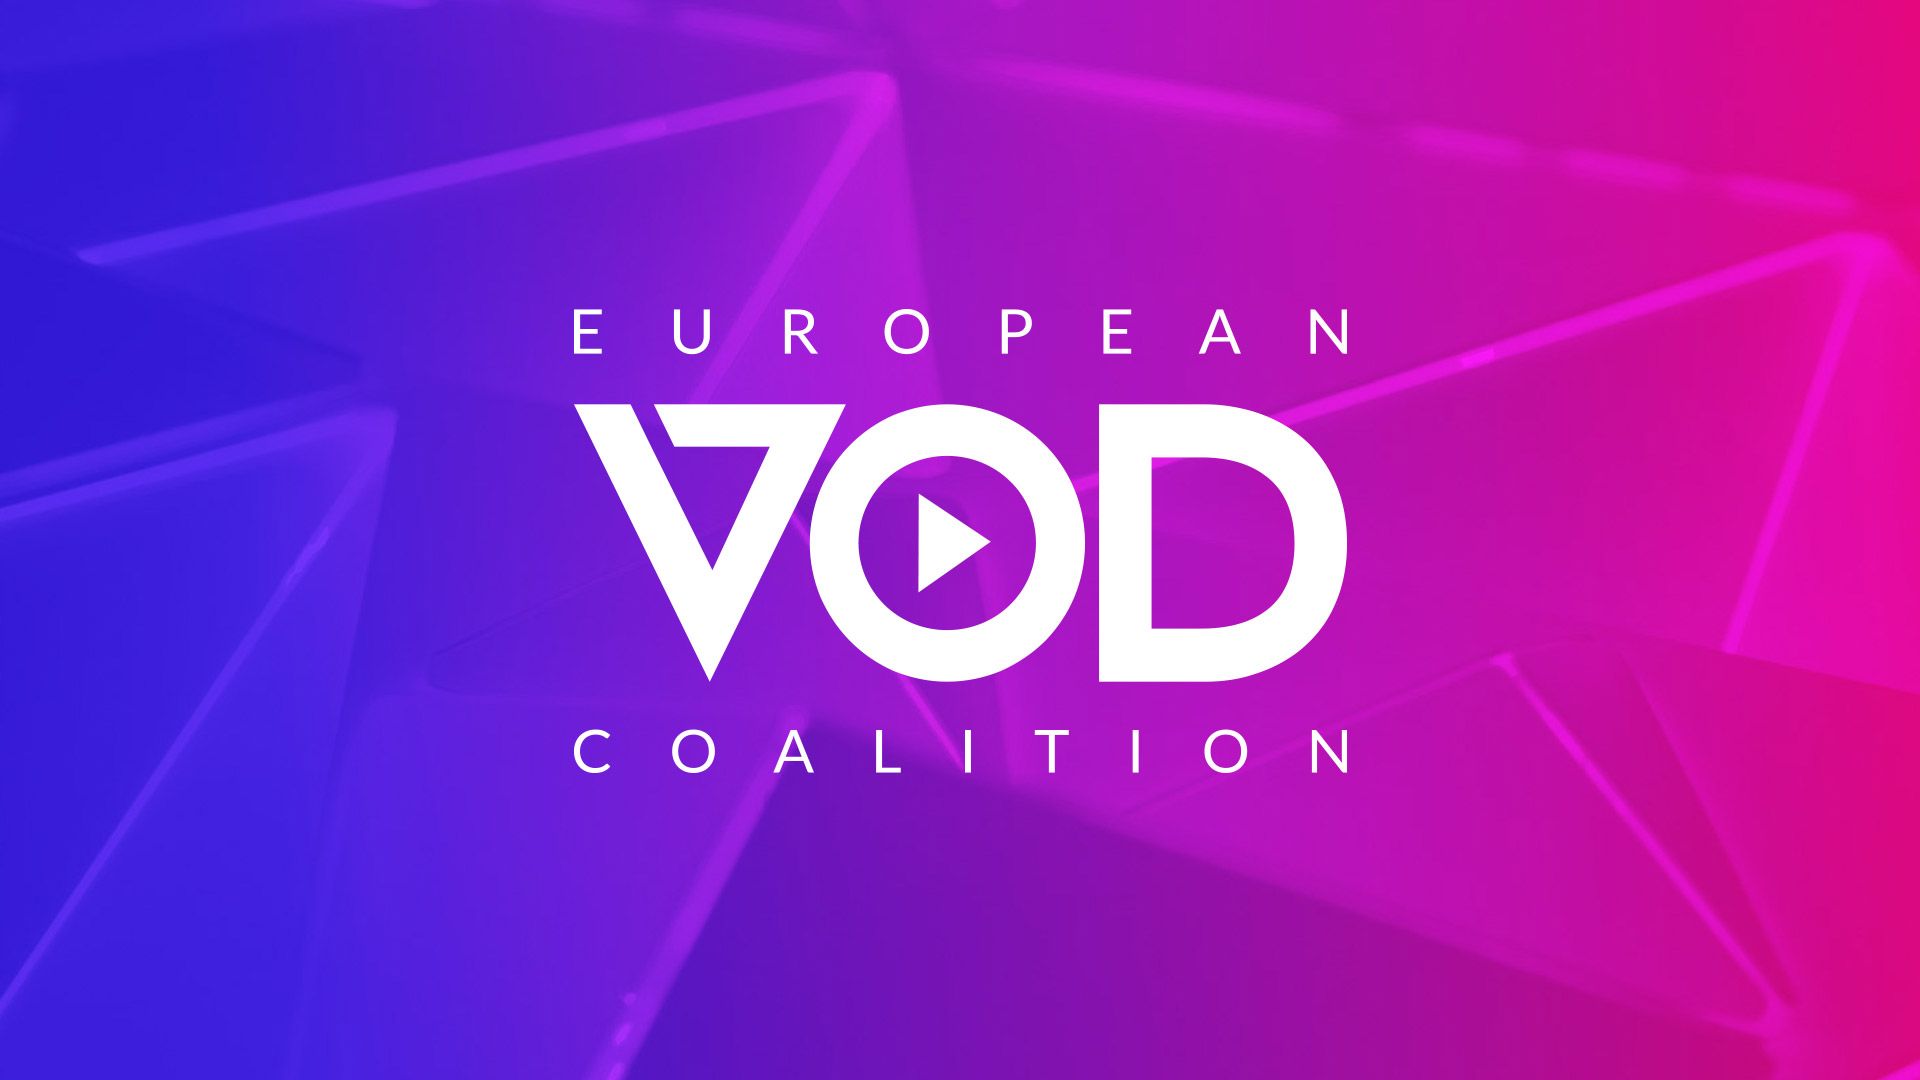 Brussels, May 10 2022: Video-on-demand (VOD) companies today officially inaugurated the European VOD Coalition. The Coalition gives a voice to the exc